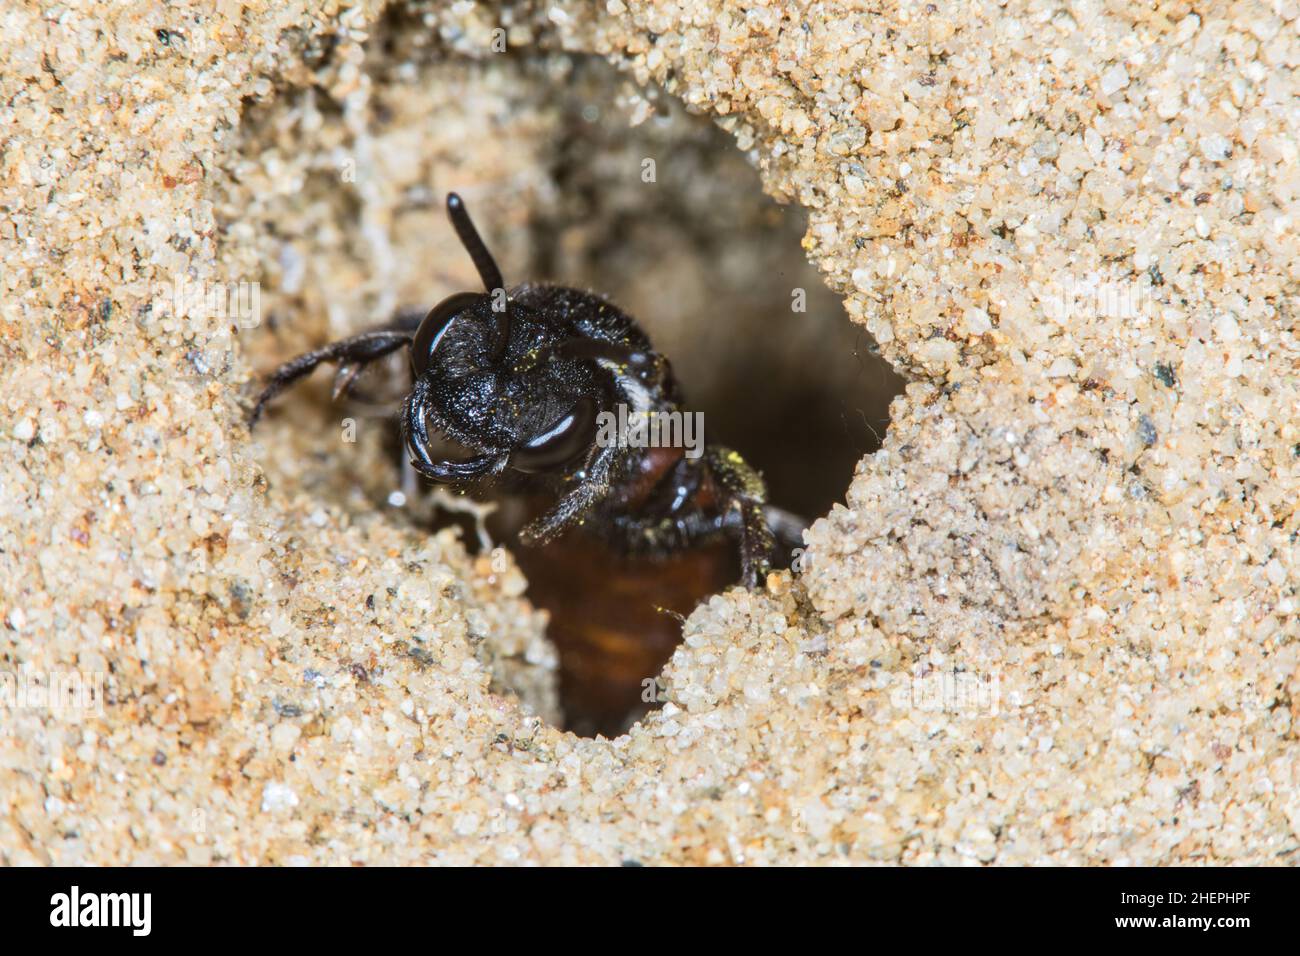 Cuckoo bee, Sweat bee, Halictid Bee (Sphecodes albilabris, Sphecodes fuscipennis), looking out of its nest tube, Germany Stock Photo